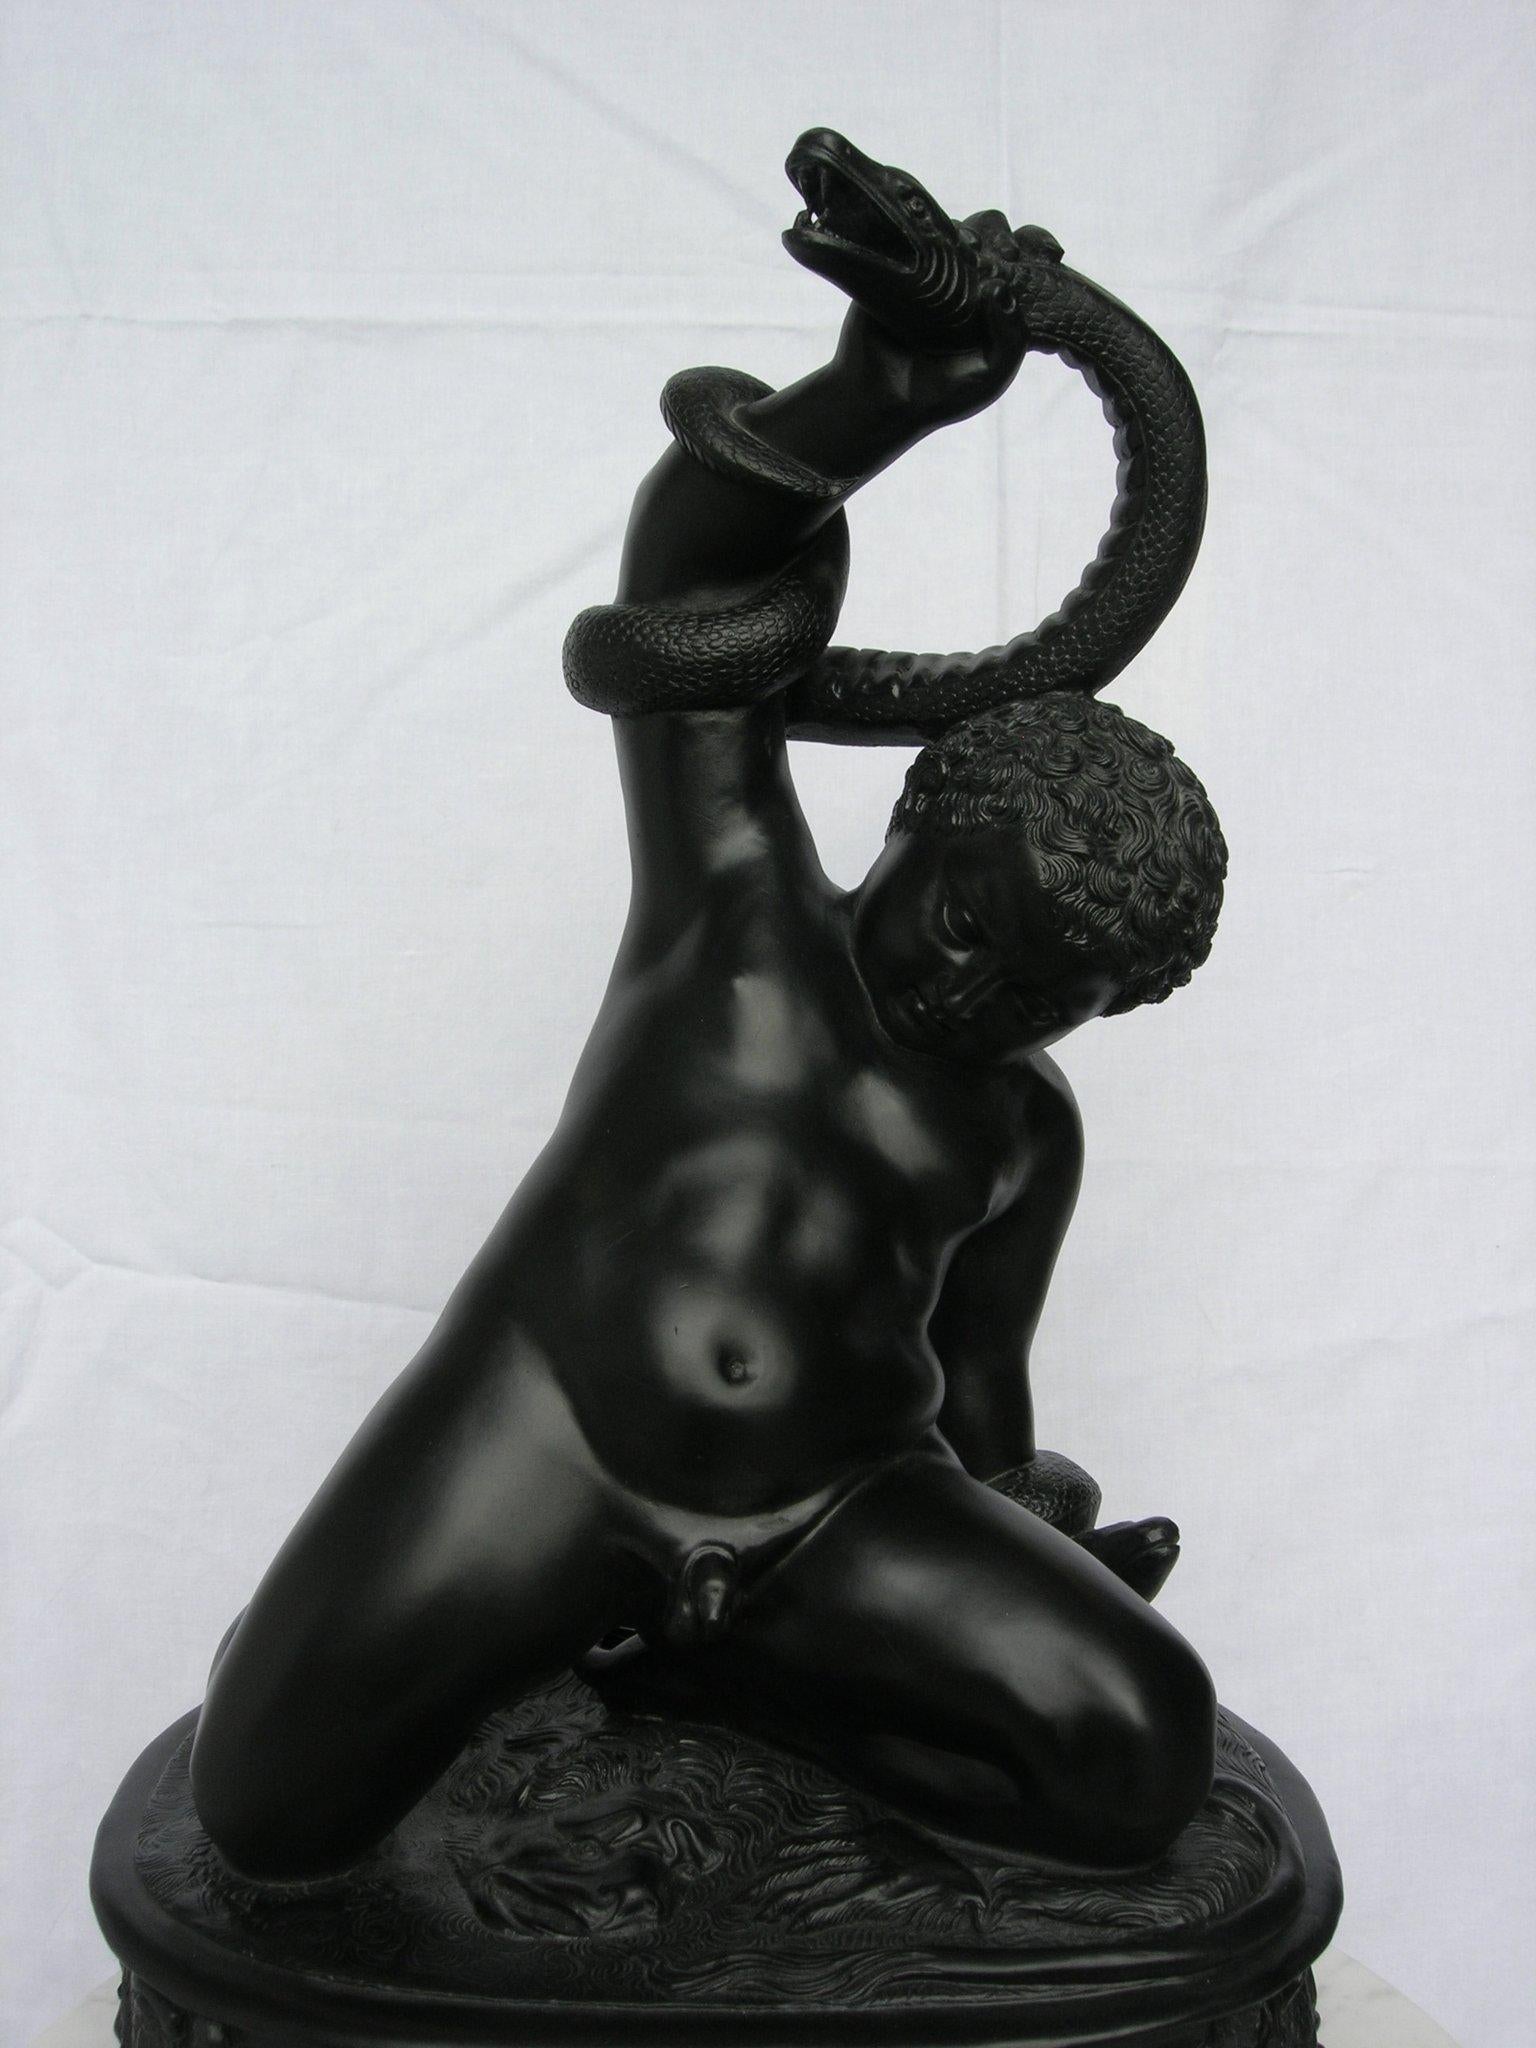 British The Young Hercules, Basalt Black Marble Sculpture, 20th Century For Sale